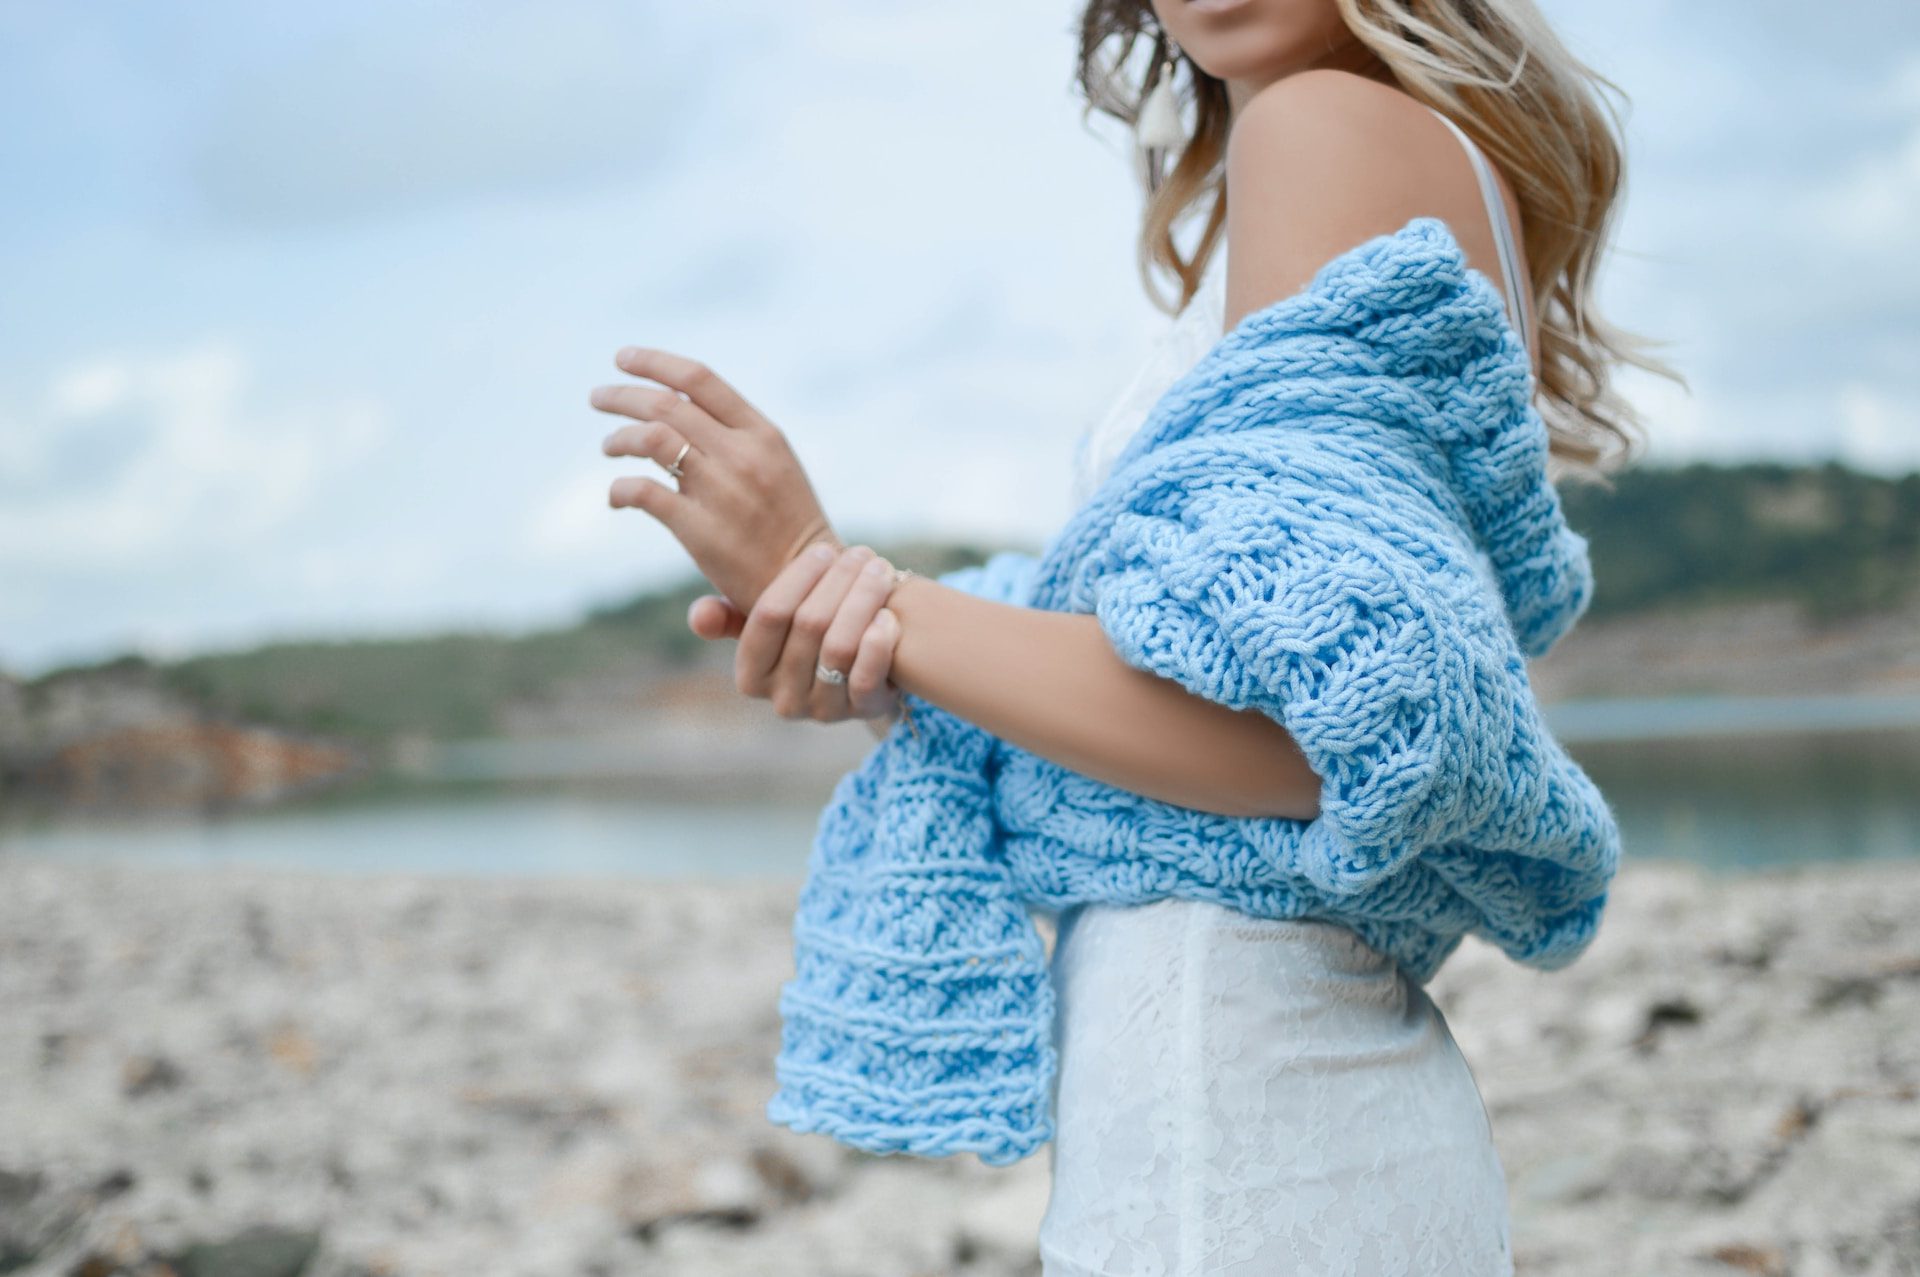 woman wearing teal crochet top and white skirt